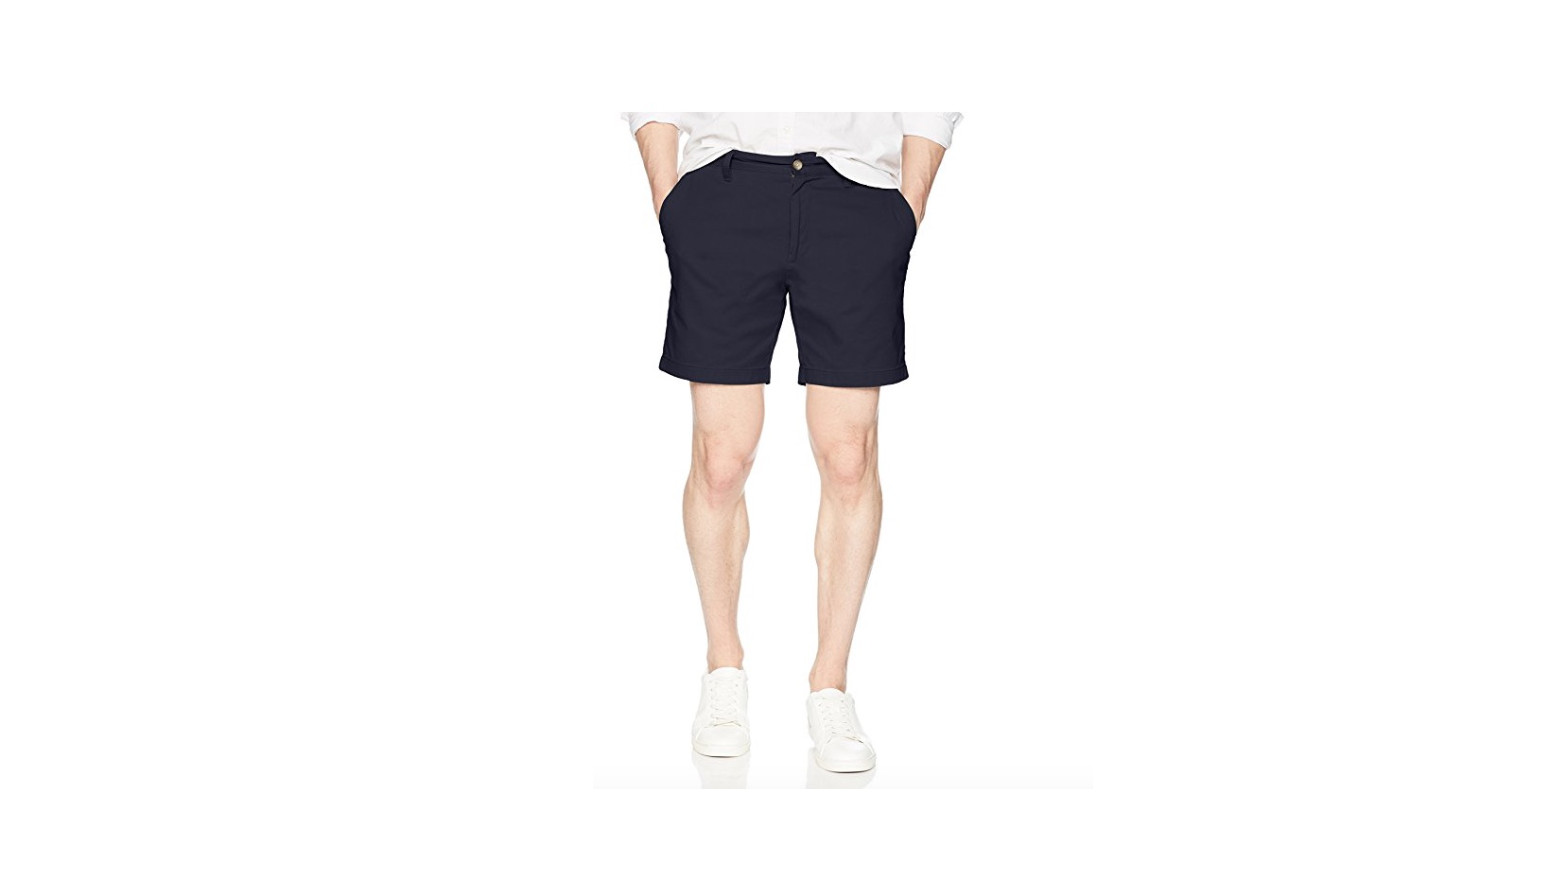 Featurestop Mens Shorts Casual Big and Tall Mens Shorts with Zipper Pockets 7 Inch Inseam 